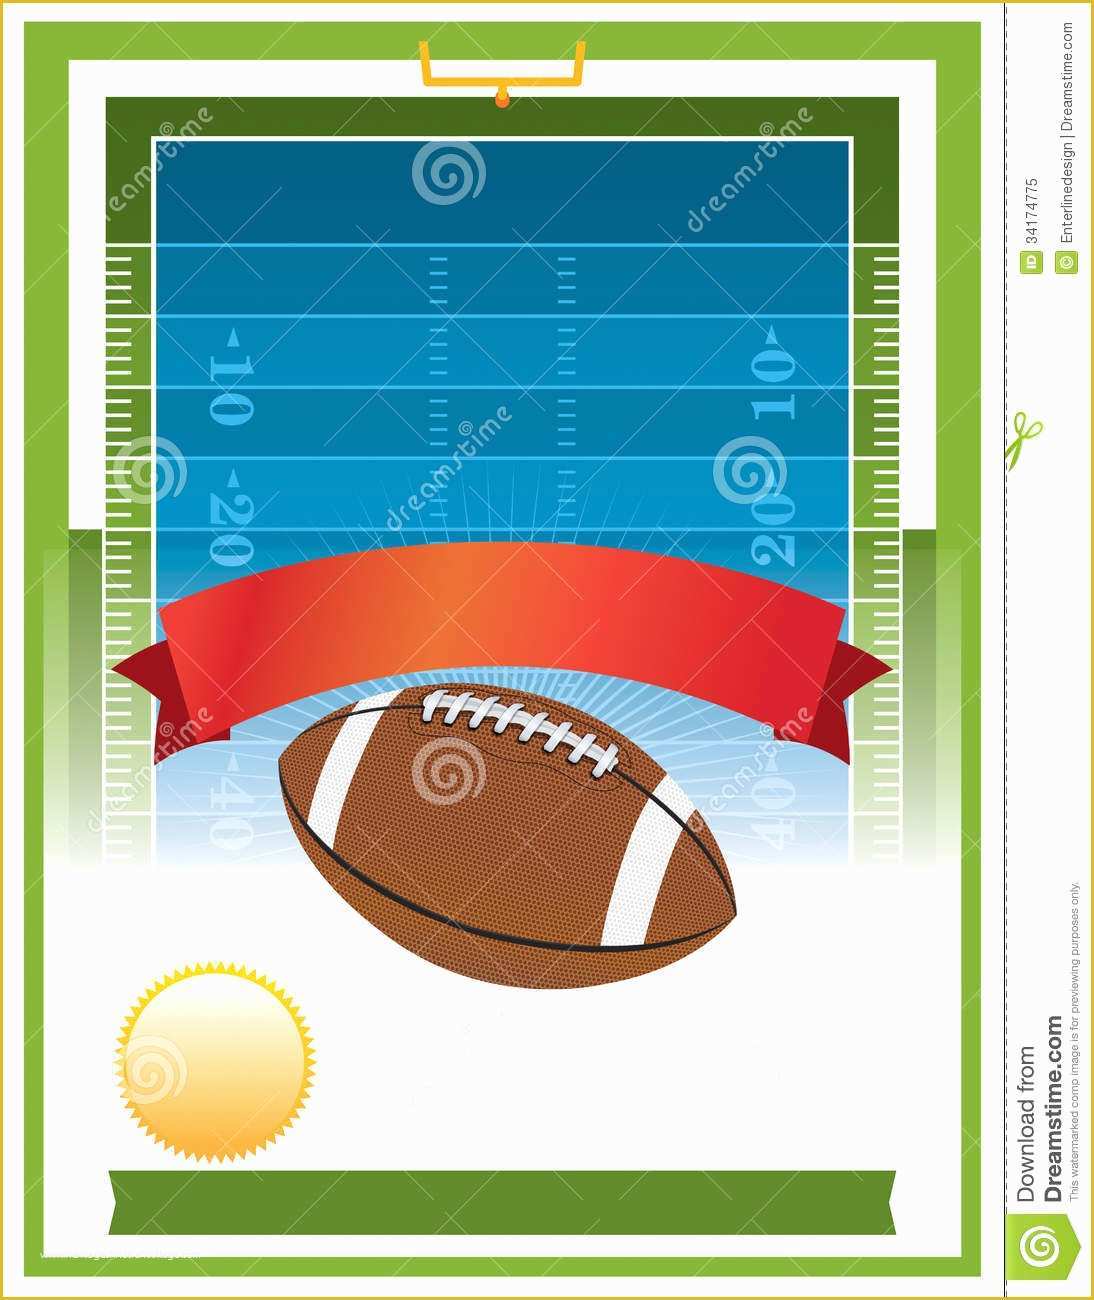 Free Tailgate Party Flyer Template Of American Football Tailgate Party Flyer Design Stock Vector